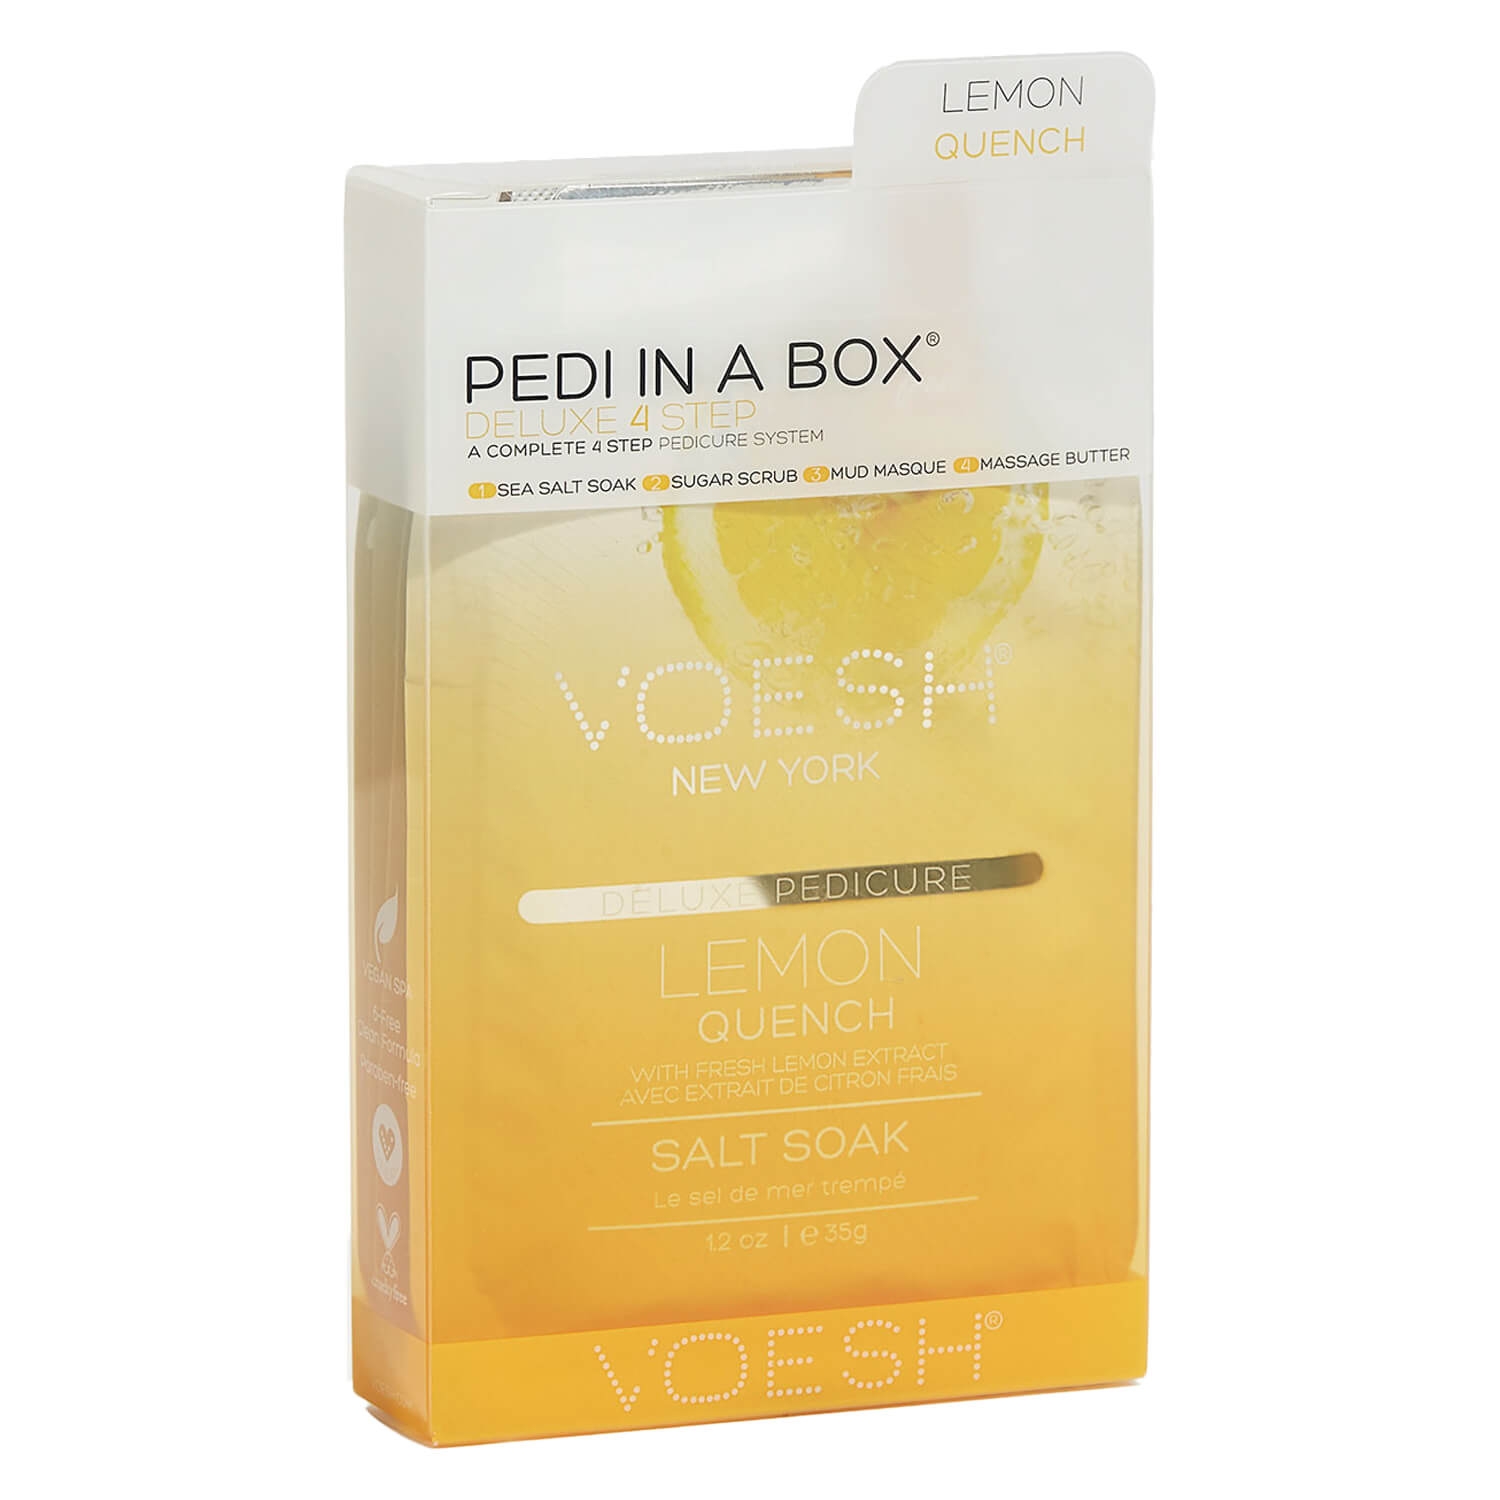 Product image from VOESH New York - Pedi In A Box 4 Step Lemon Quench